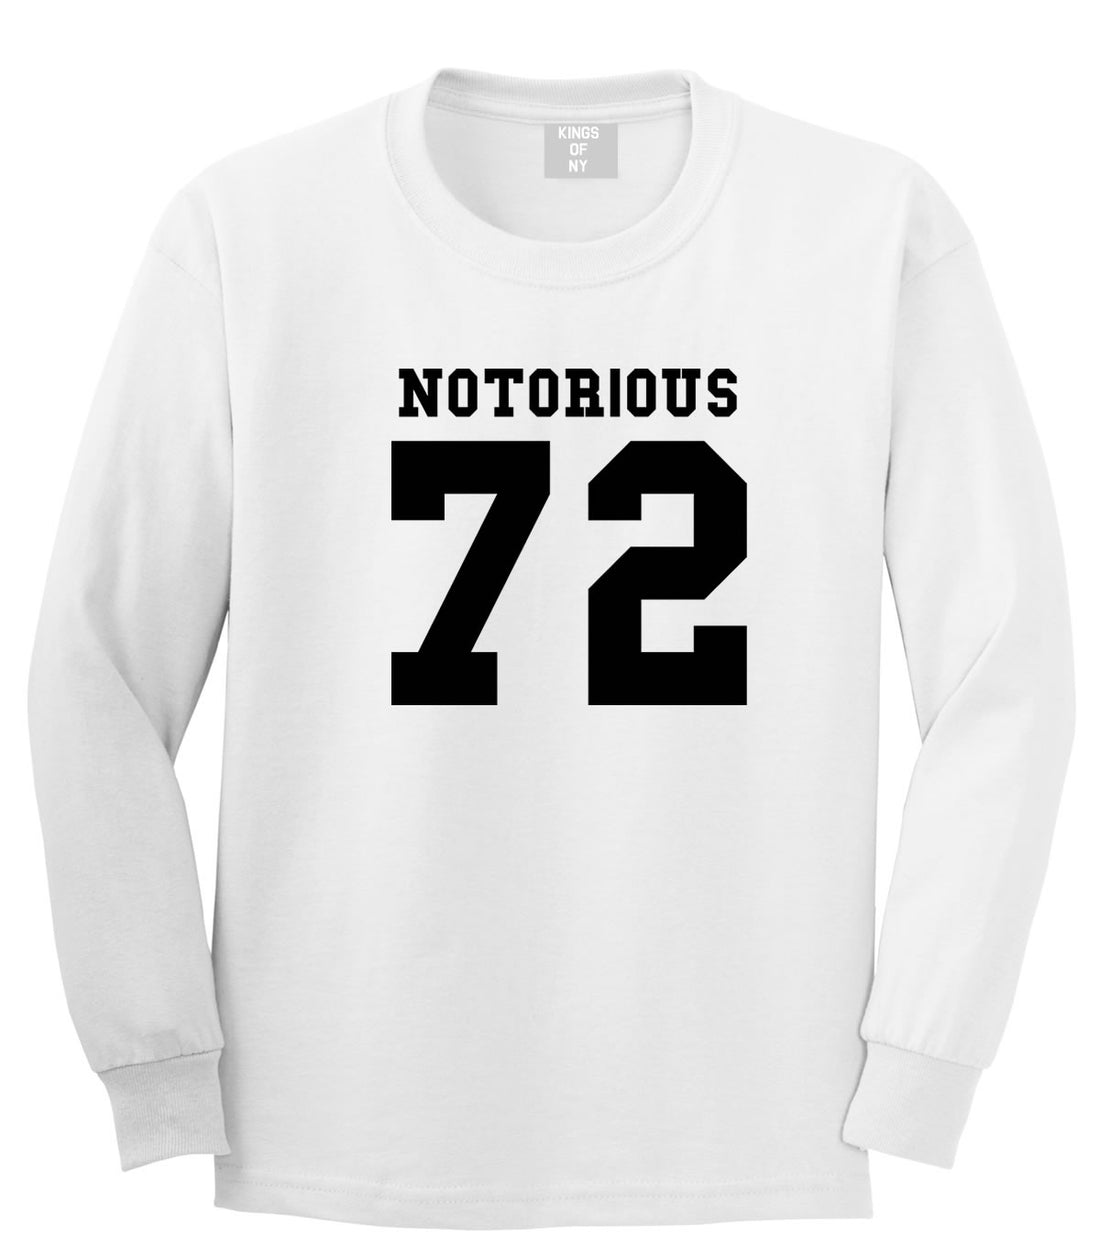 Notorious 72 Team Long Sleeve T-Shirt in White by Kings Of NY